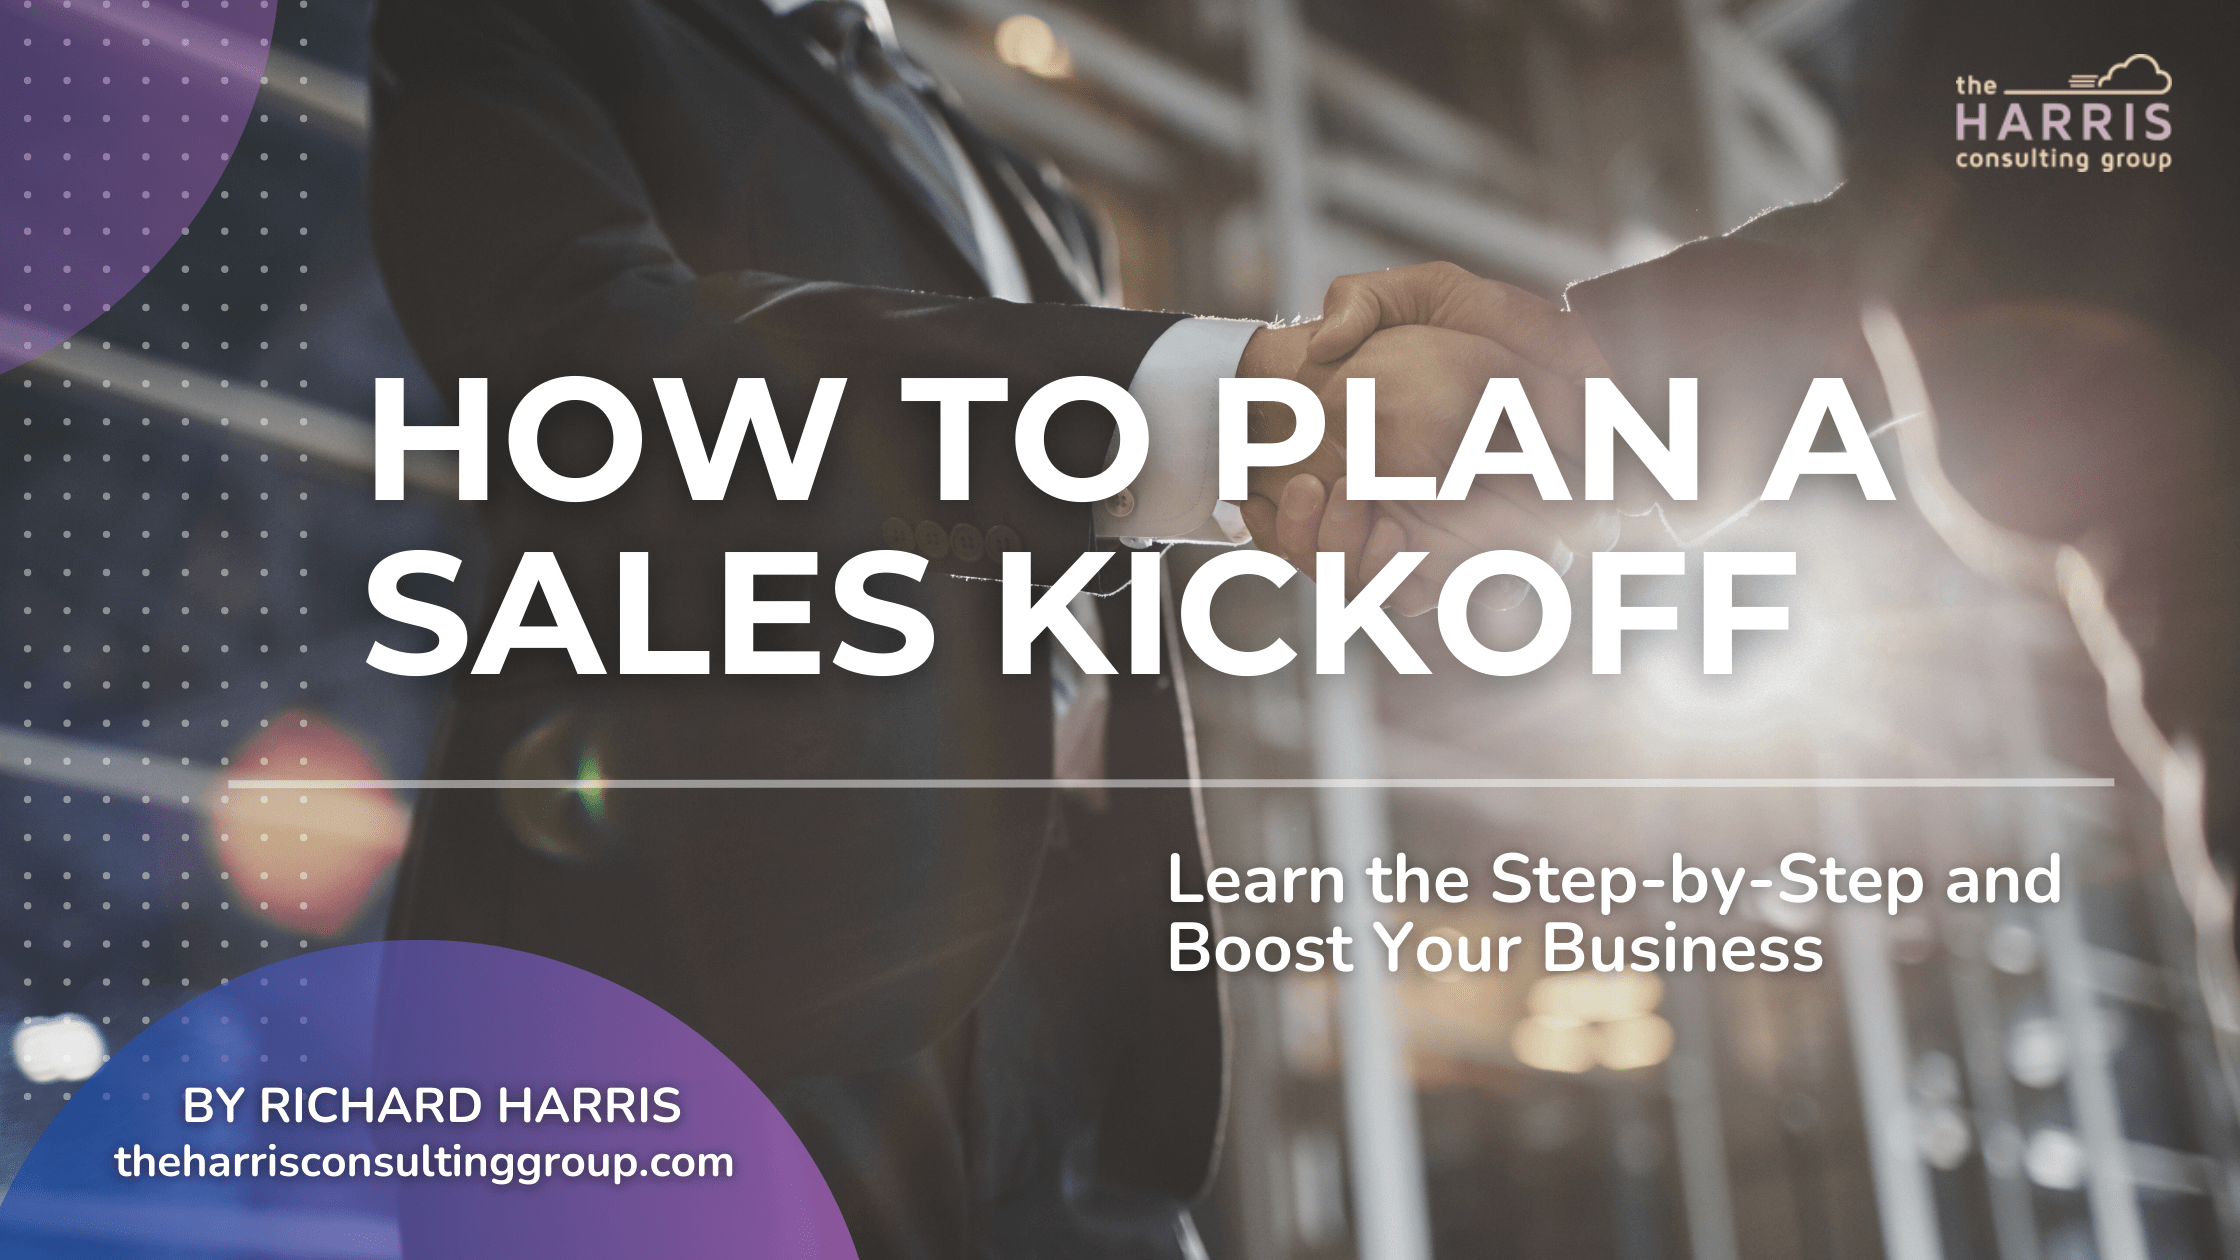 Discover how to plan a Sales Kickoff